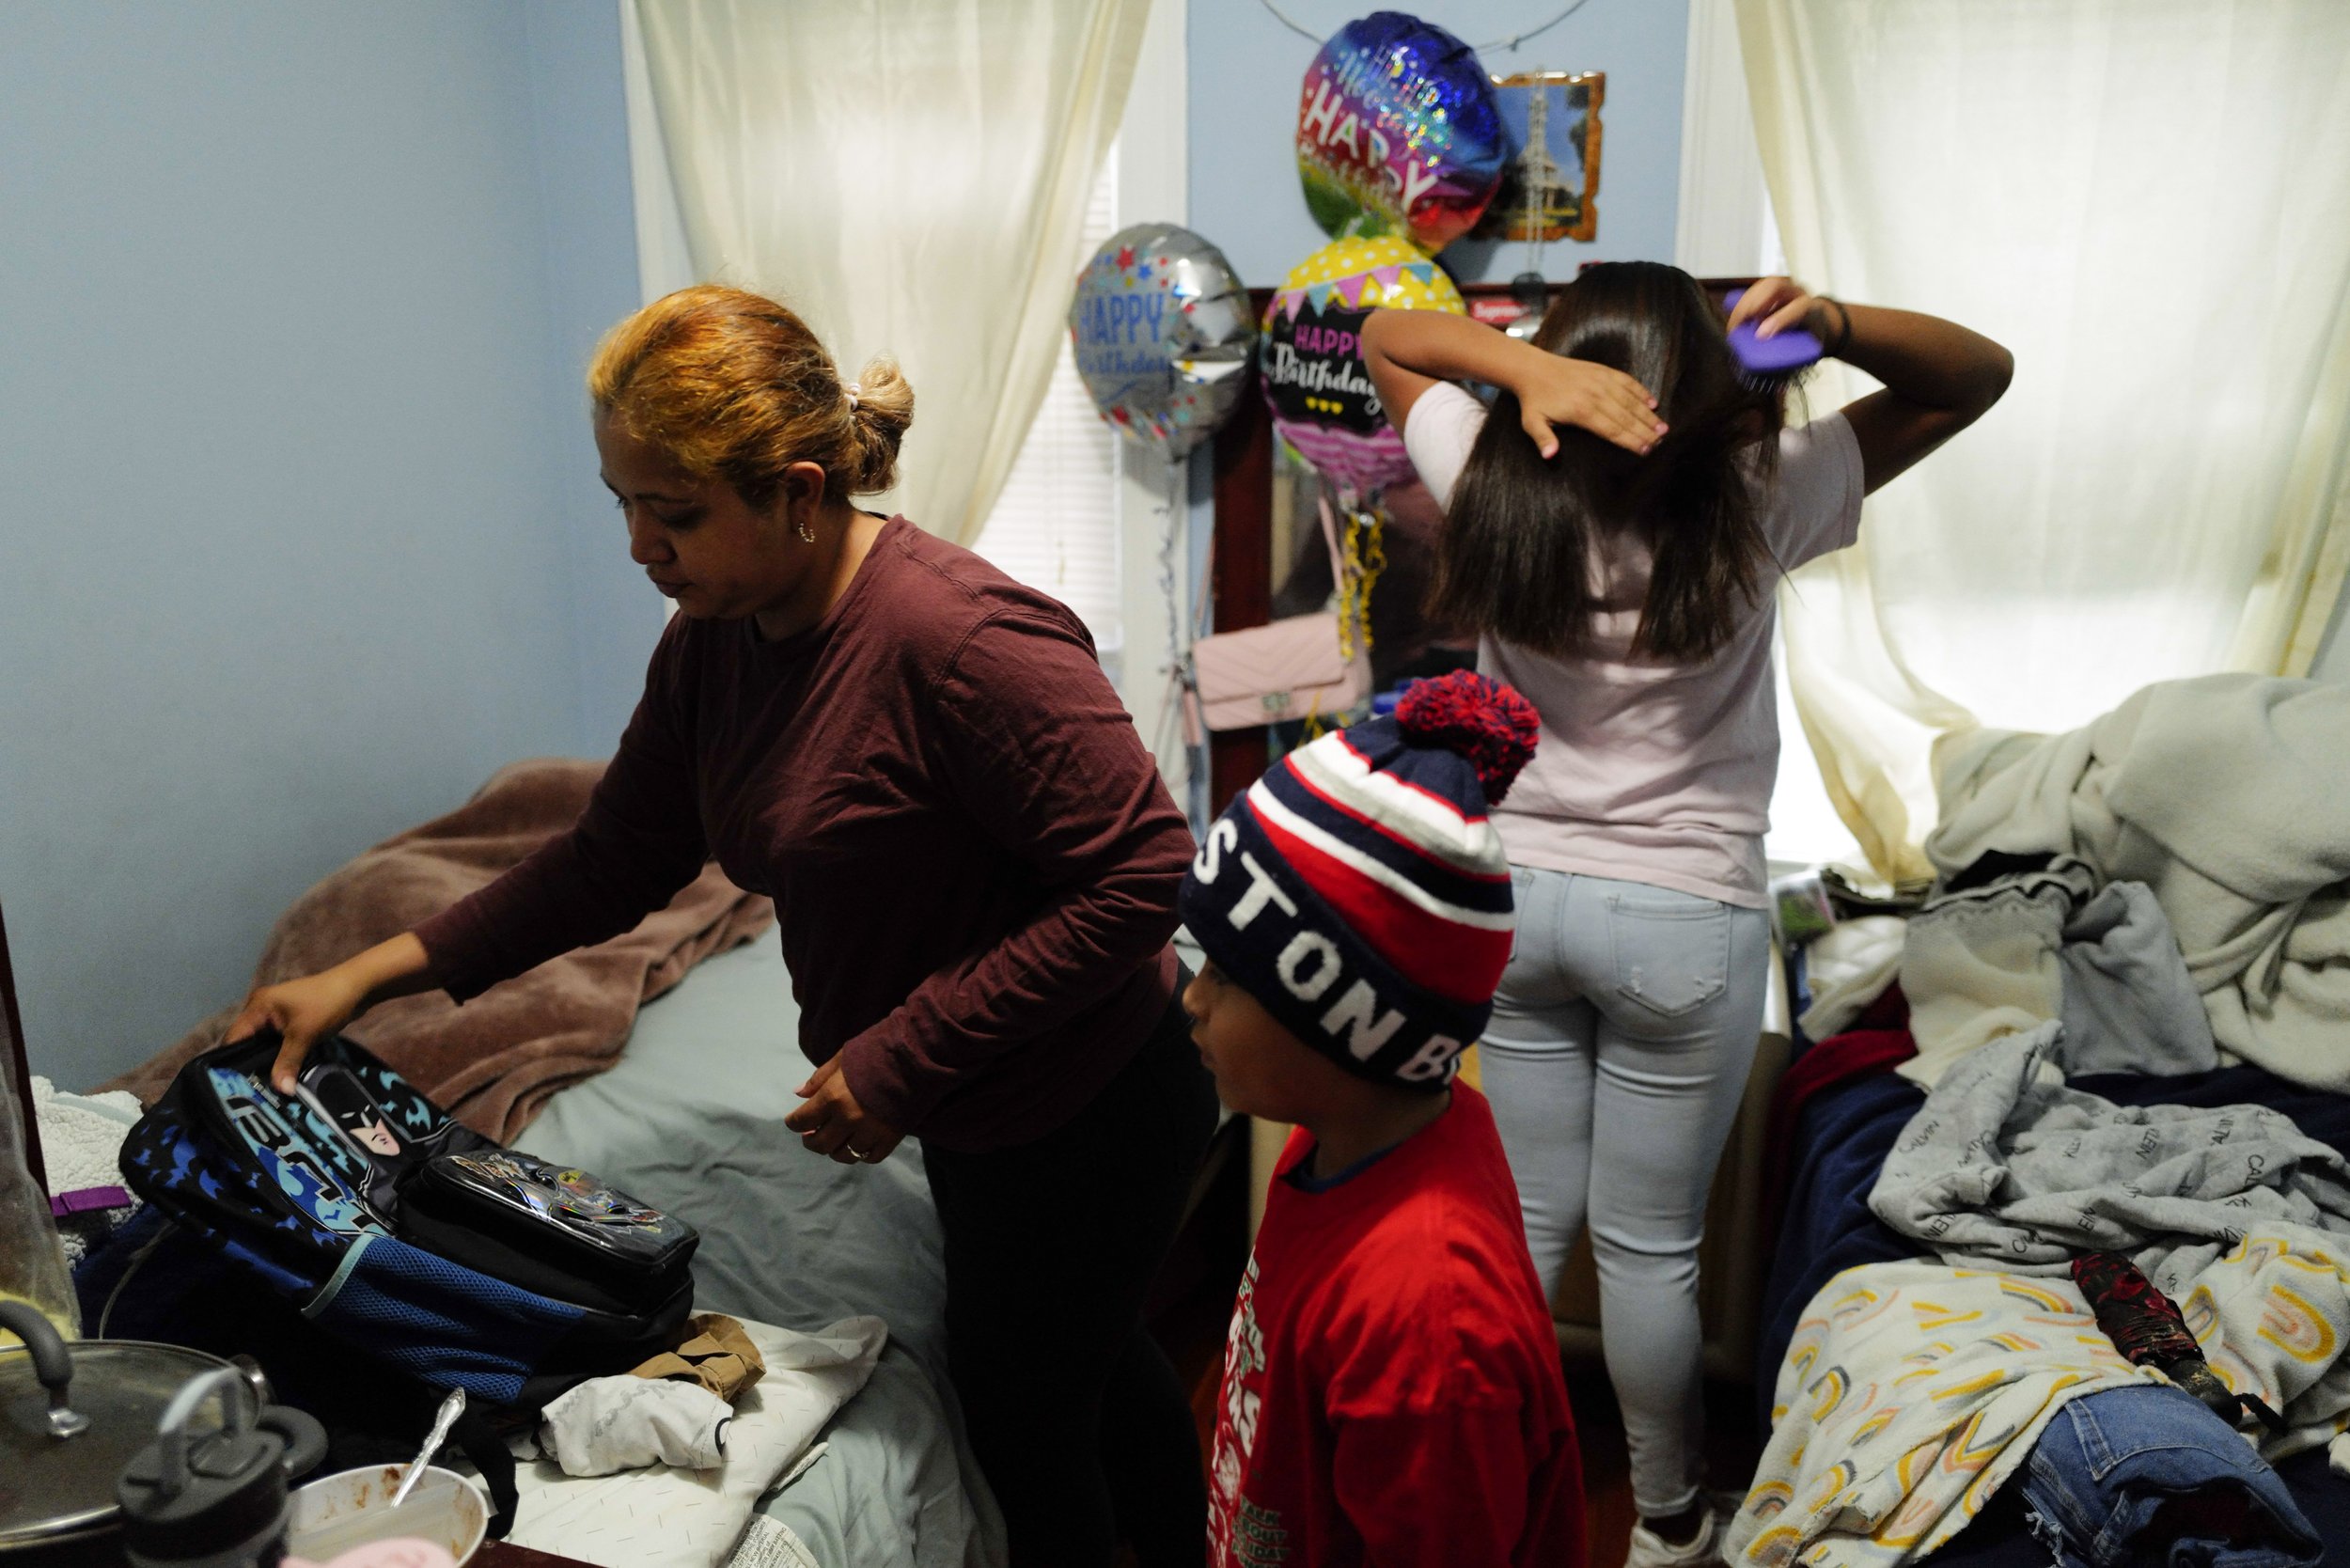  Teresa (left) helps pack her son, Raul Alexis’s (center), 6, school bag while Manuel’s daughter, Fernanda Aimee (right), 12, combs her hair in the early morning before school inside the shared room Manuel and Teresa rent in their old residence in So